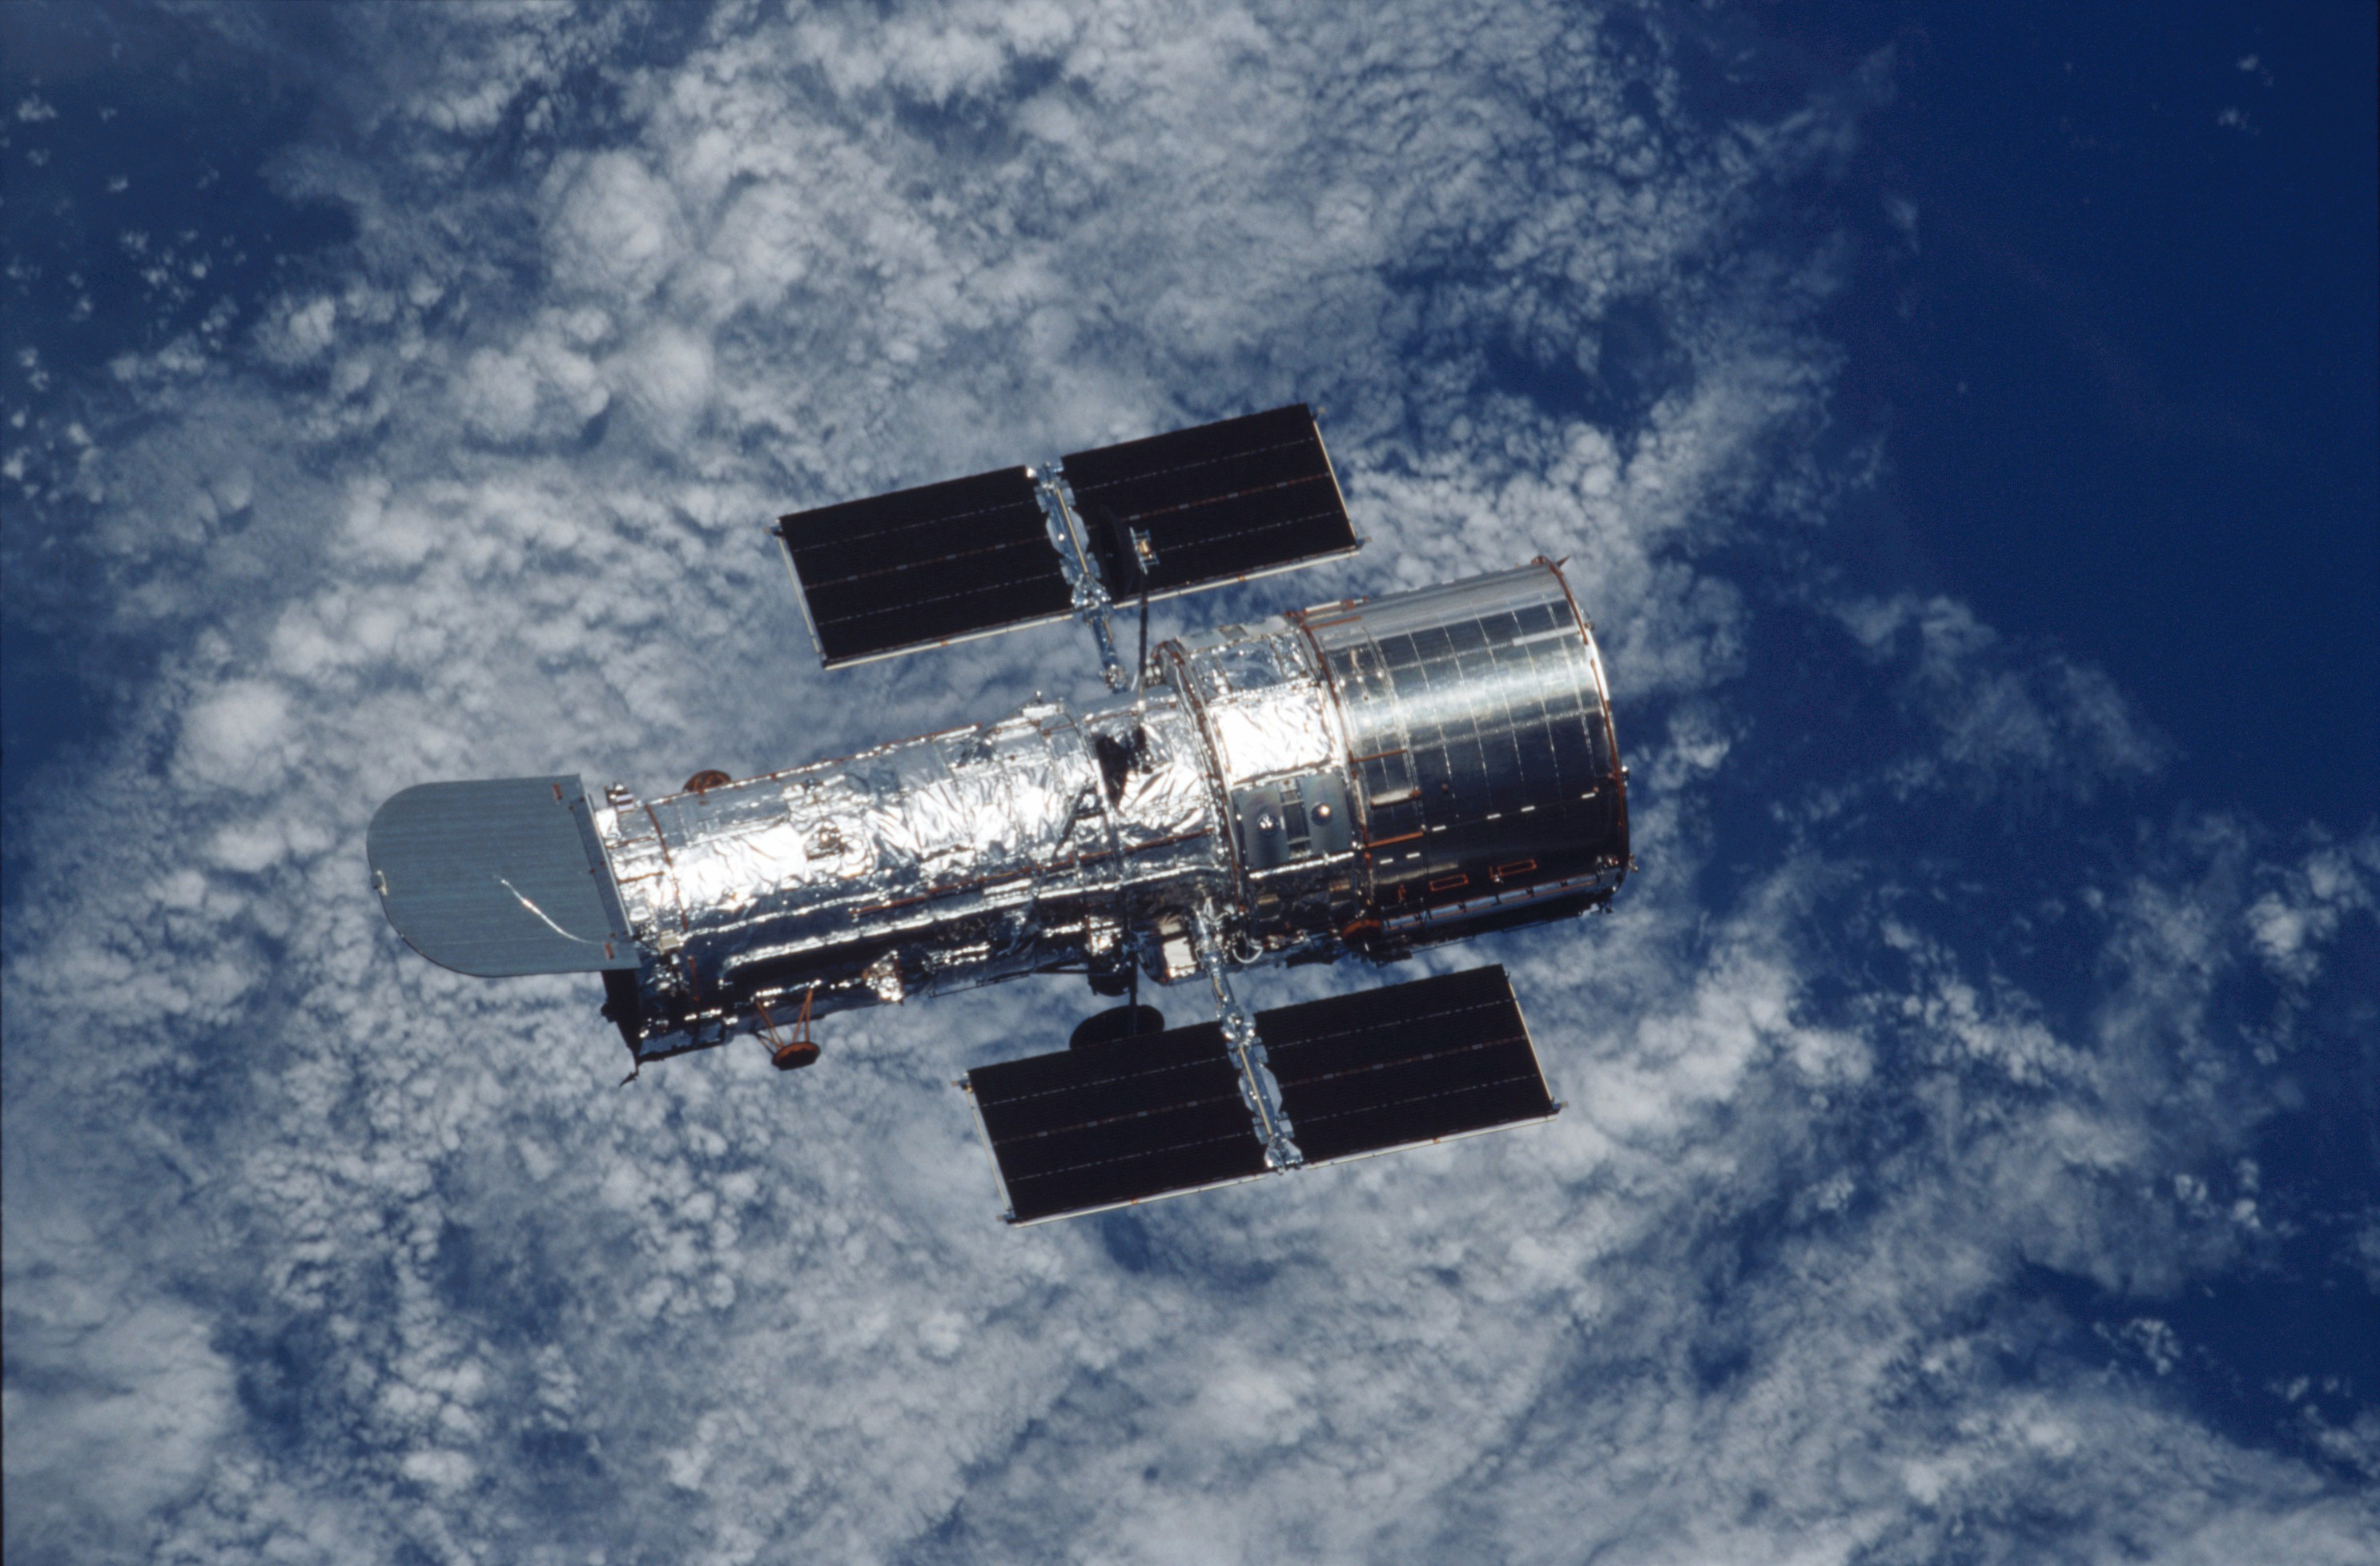 The Hubble Space Telescope appears to "fly" over Earth as it is photographed during STS-109. Photo Credit: NASA